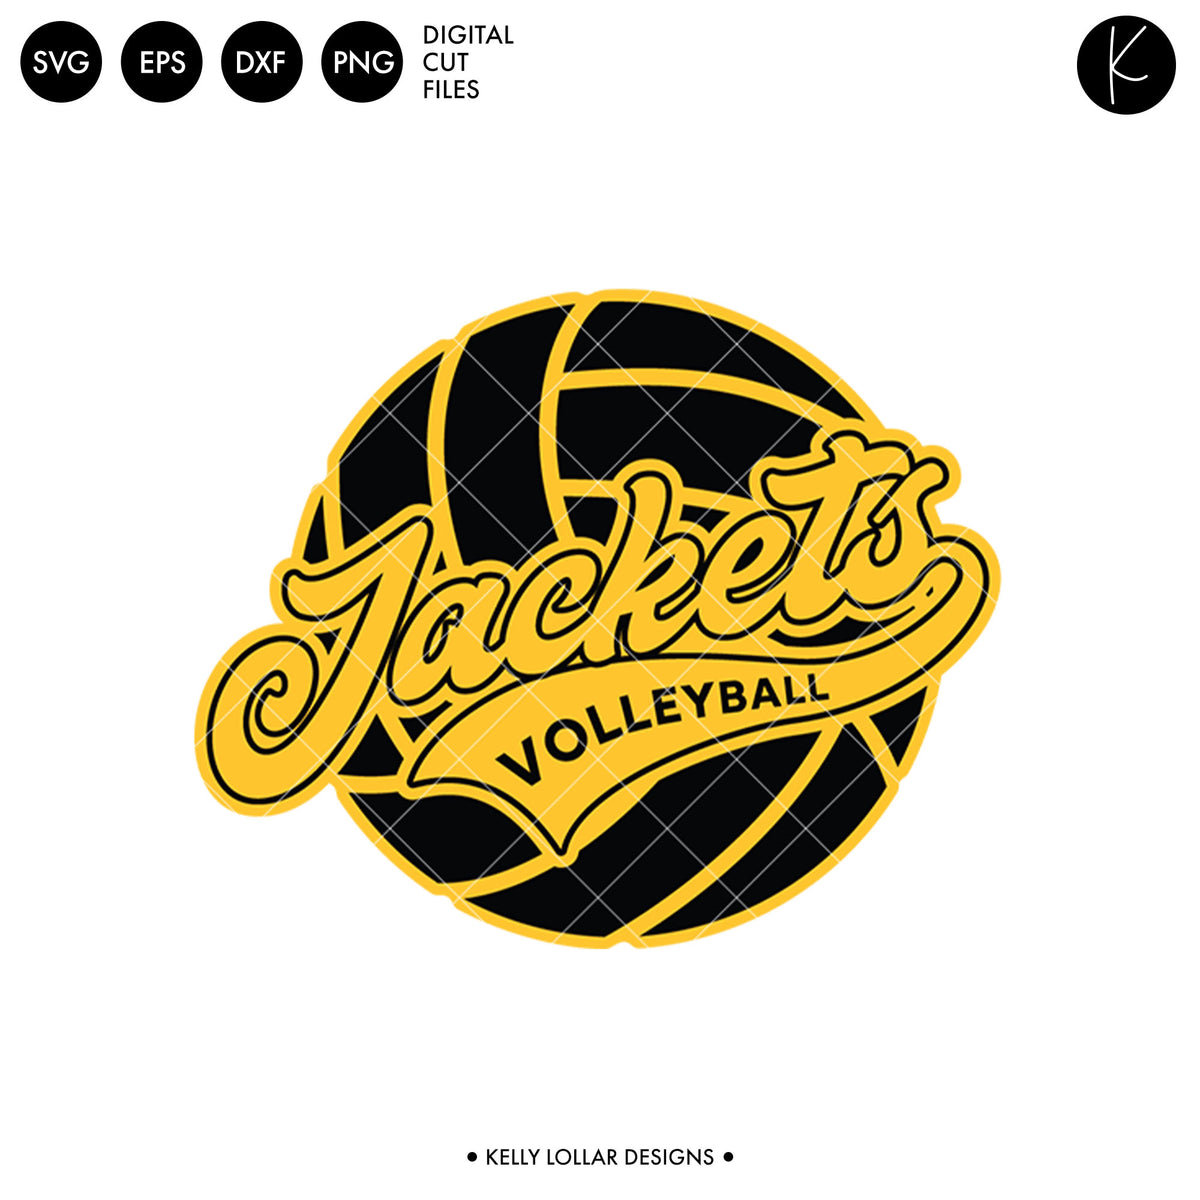 Jackets Volleyball Bundle | SVG DXF EPS PNG Cut Files